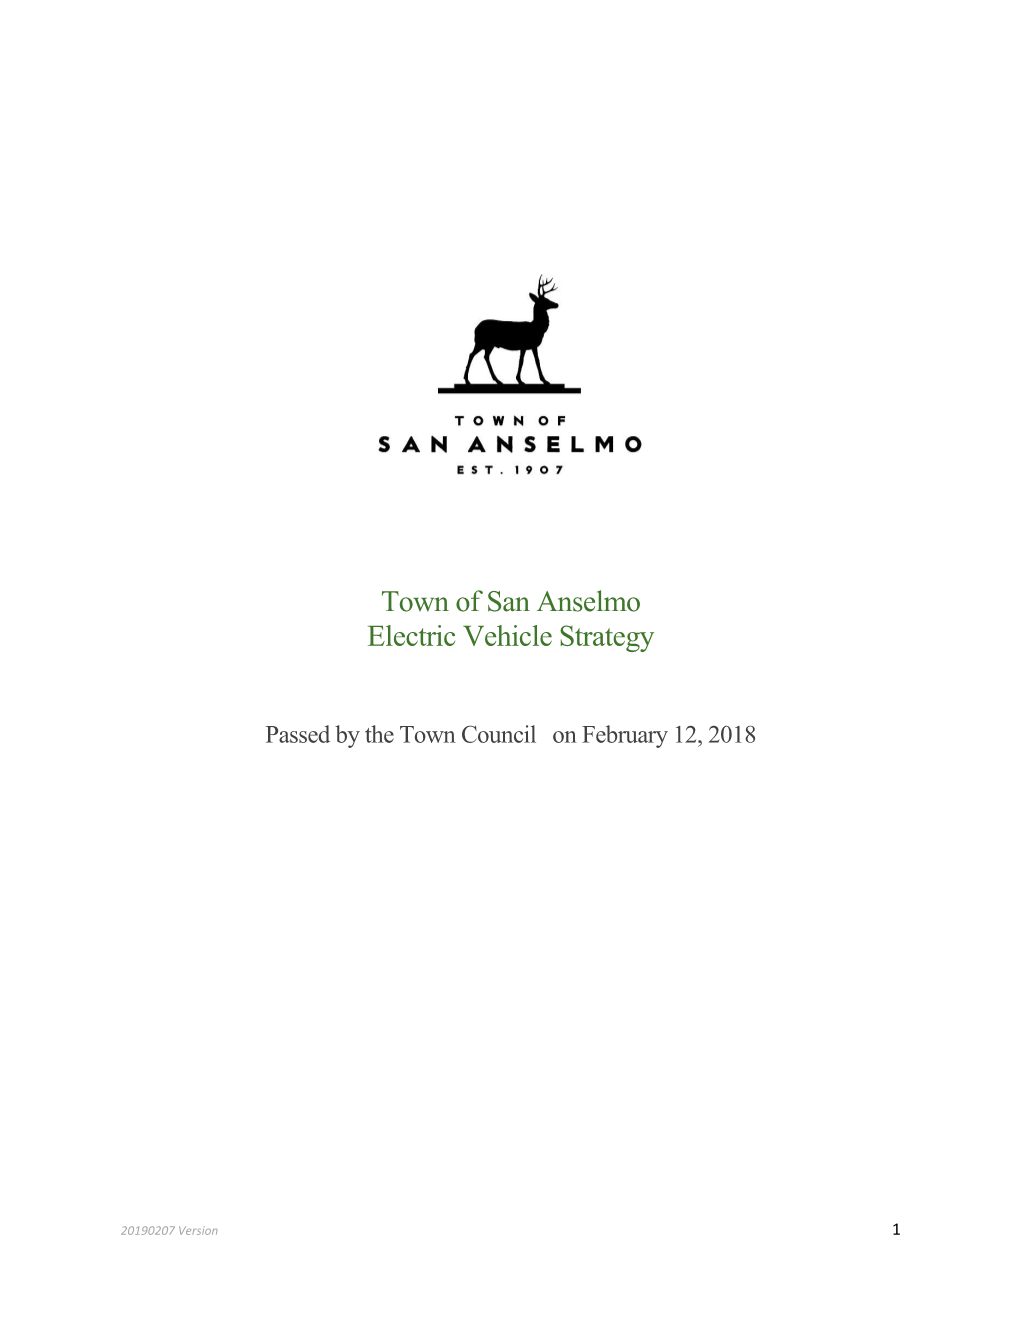 Town of San Anselmo Electric Vehicle Strategy